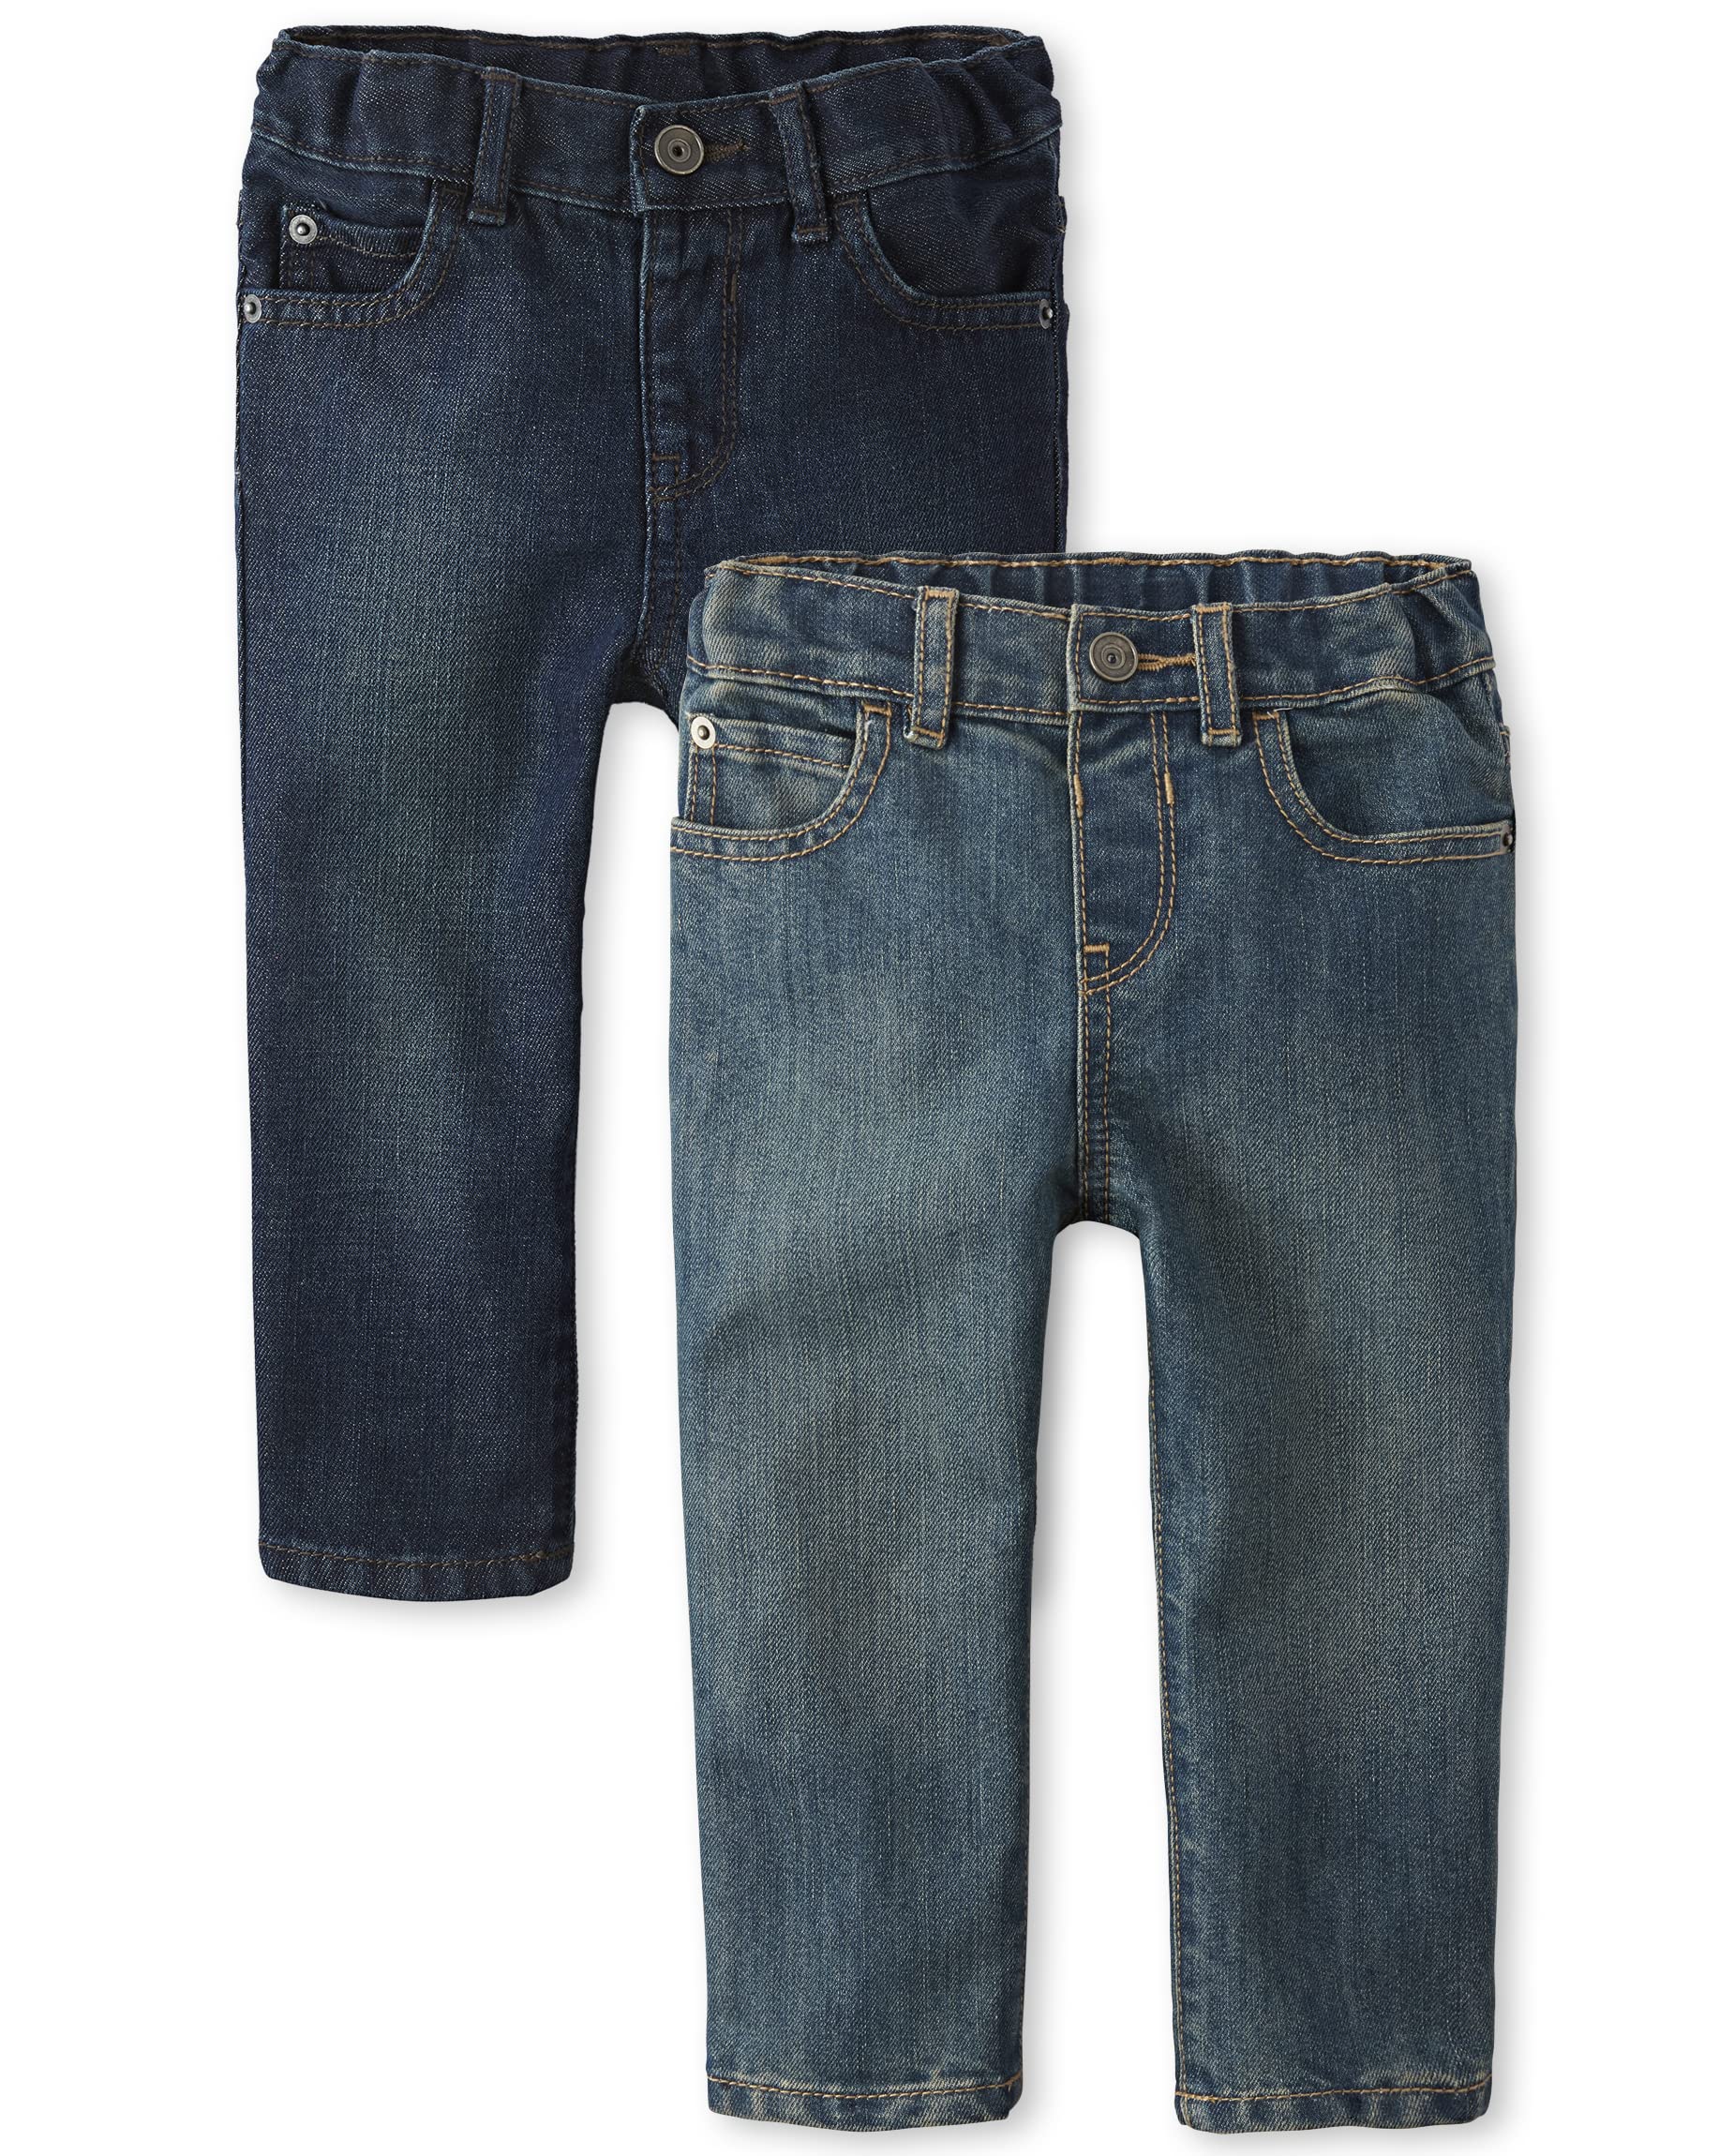 The Children's Place Baby Boys' Single and Toddler Multipack Basic Skinny Jeans